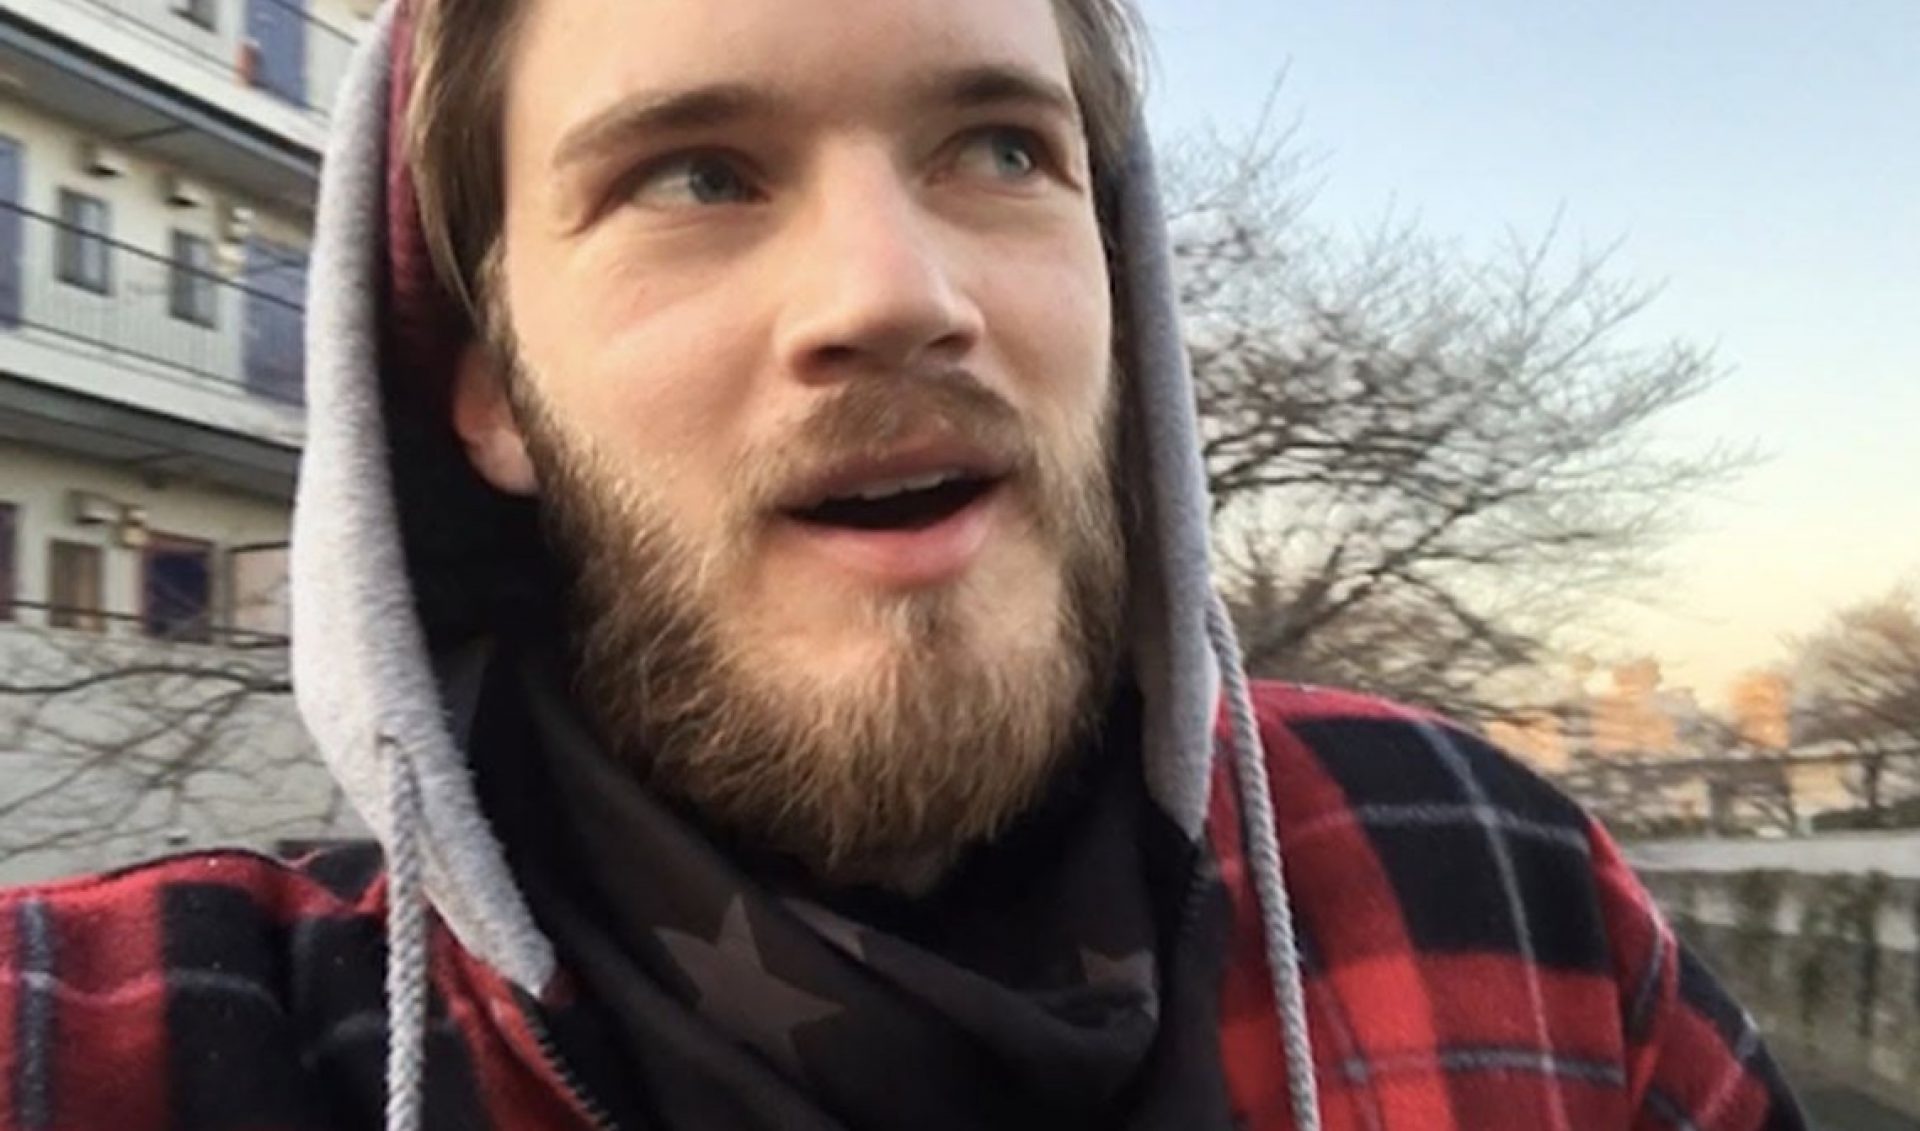 YouTube’s Drama Problem: PewDiePie Condemns Gossip, Promptly Lands Himself In Public Feud